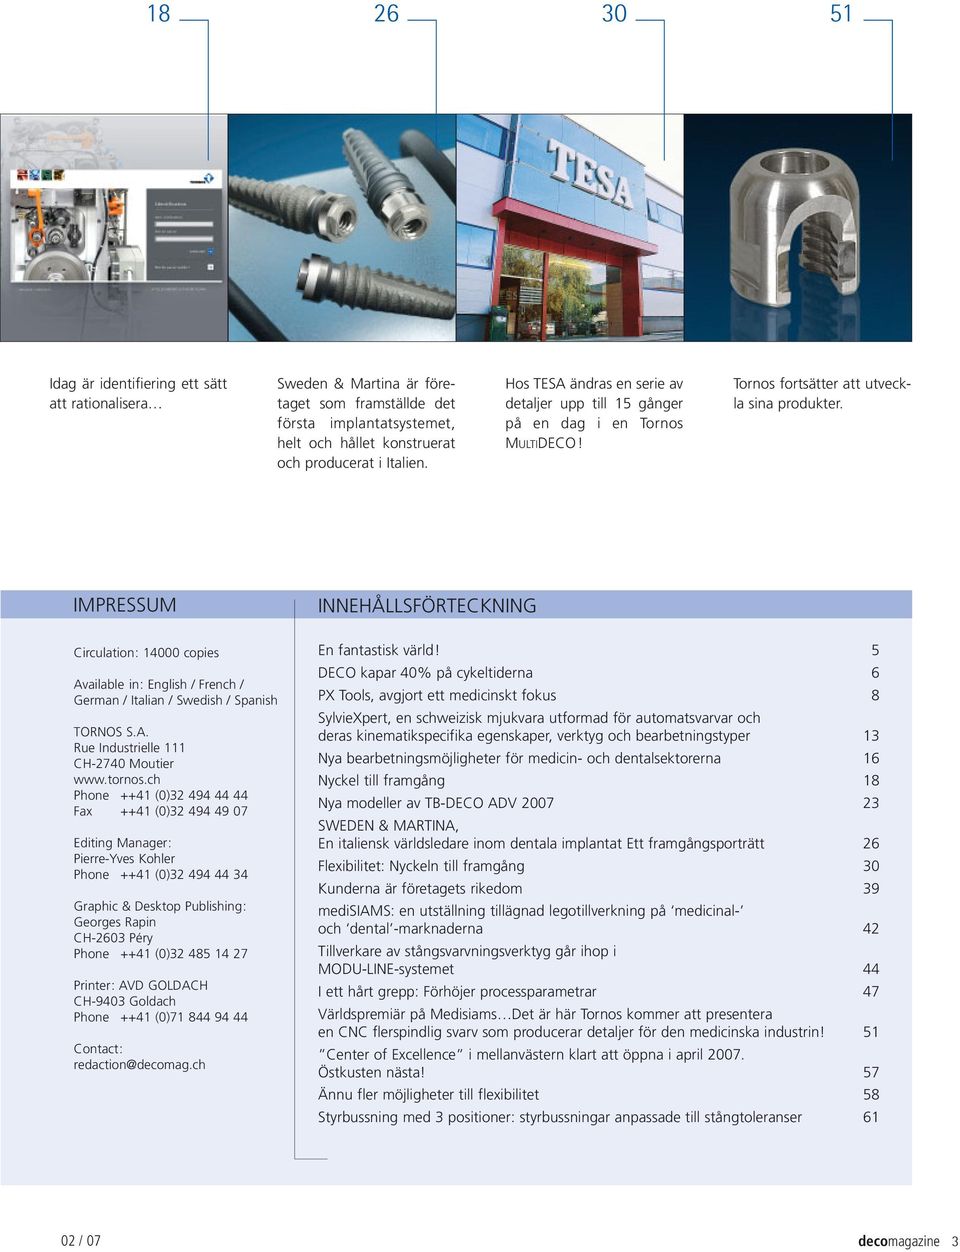 IMPRESSUM Circulation: 14000 copies Available in: English / French / German / Italian / Swedish / Spanish TORNOS S.A. Rue Industrielle 111 CH-2740 Moutier www.tornos.